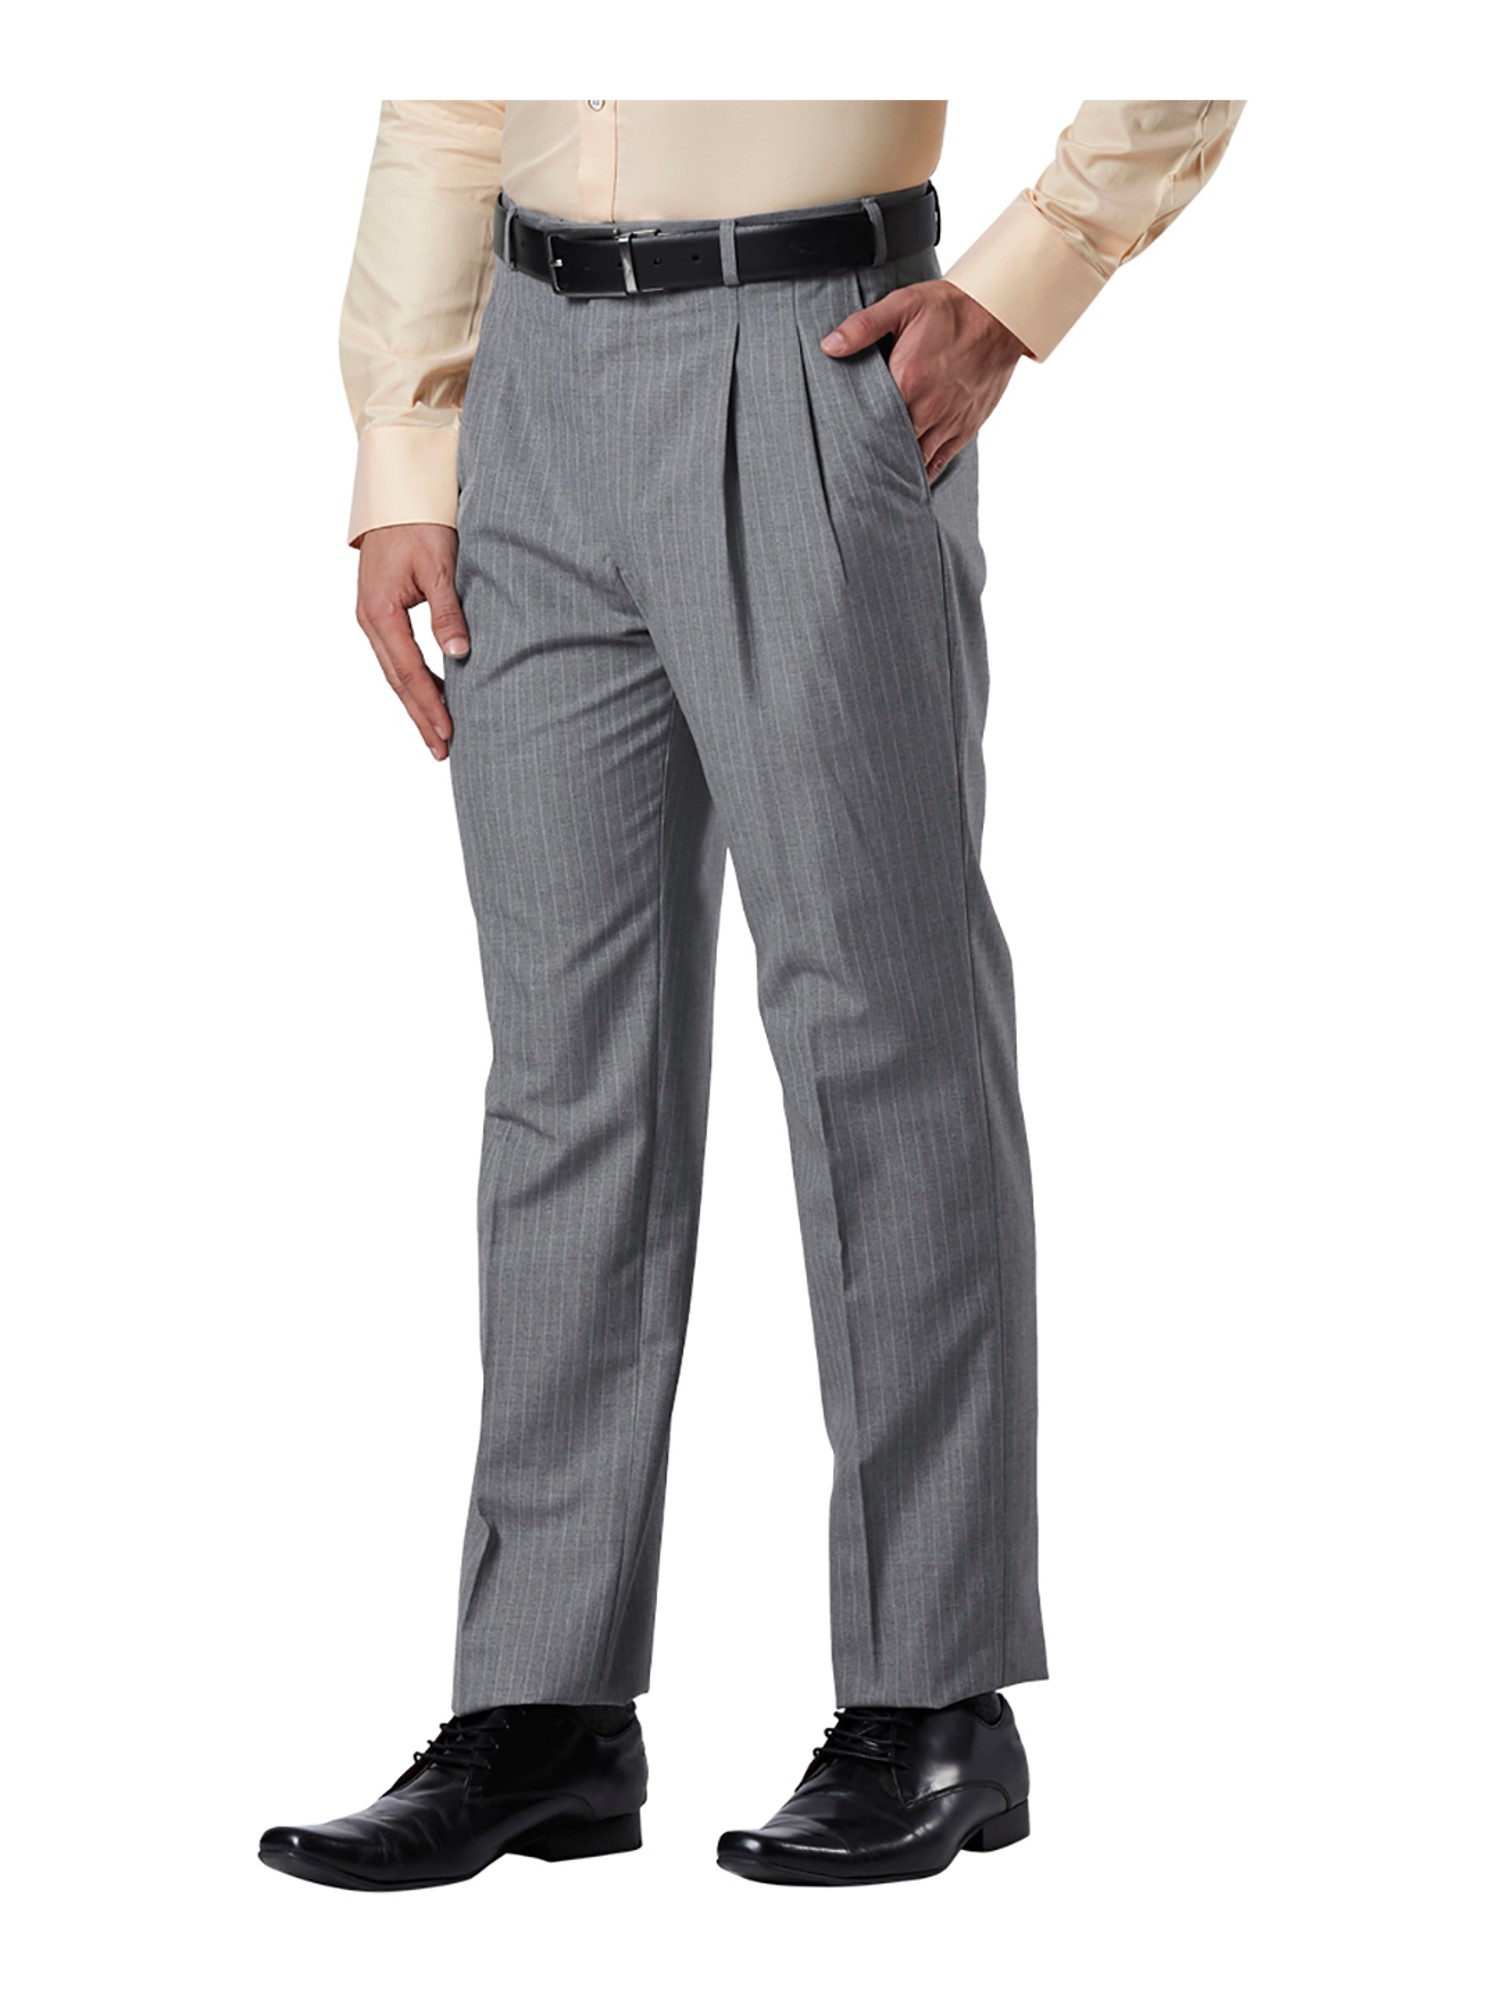 Formal Brown Pleated Trouser for mens  Plus Size Pants Big Size Trouser   Regular Fit  Size  36  38 40  42